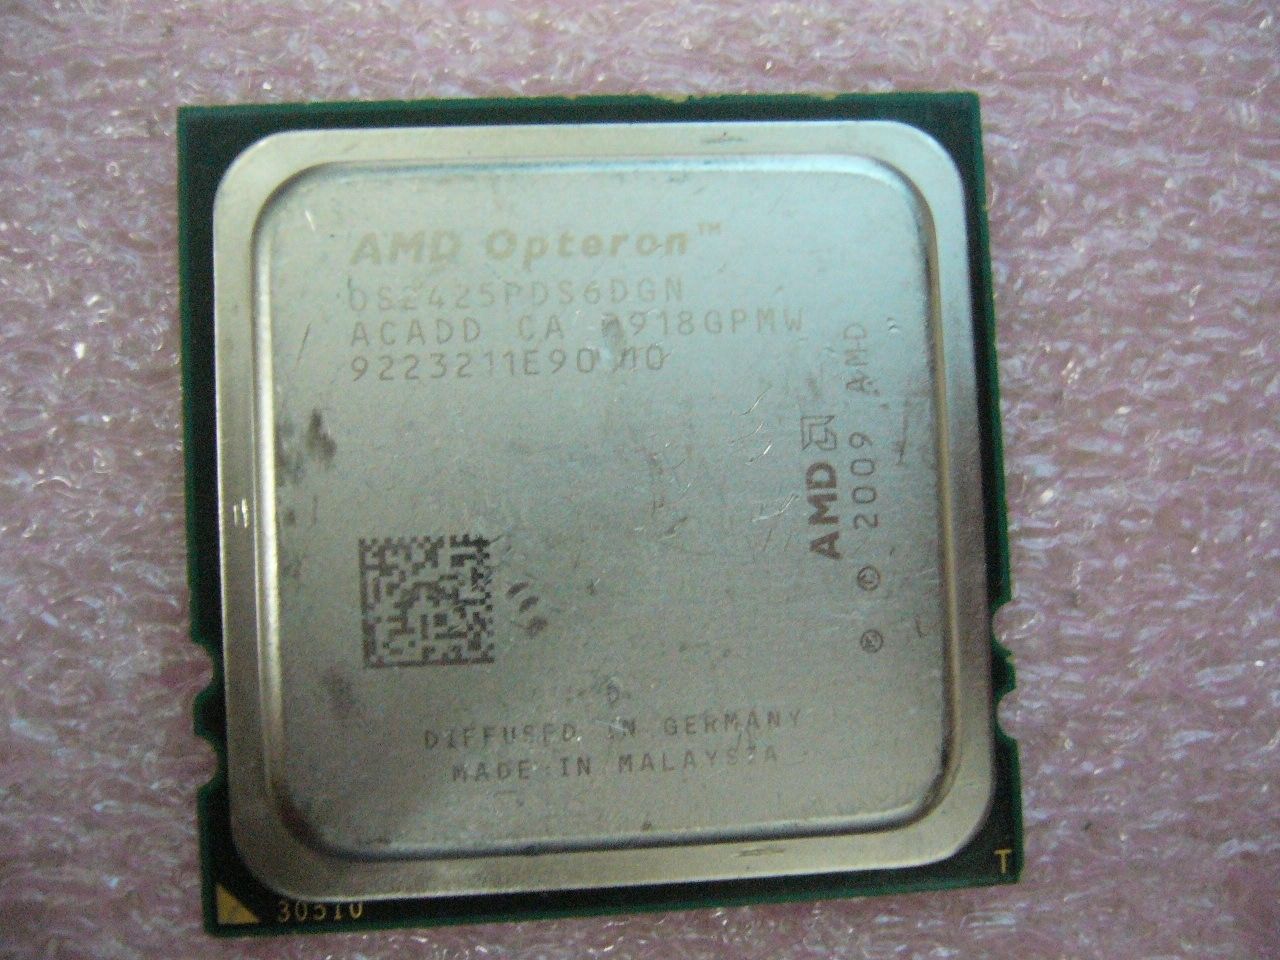 QTY 1x AMD Opteron 2425 HE 2.1 GHz Six Core (OS2425PDS6DGN) CPU Socket F 1207